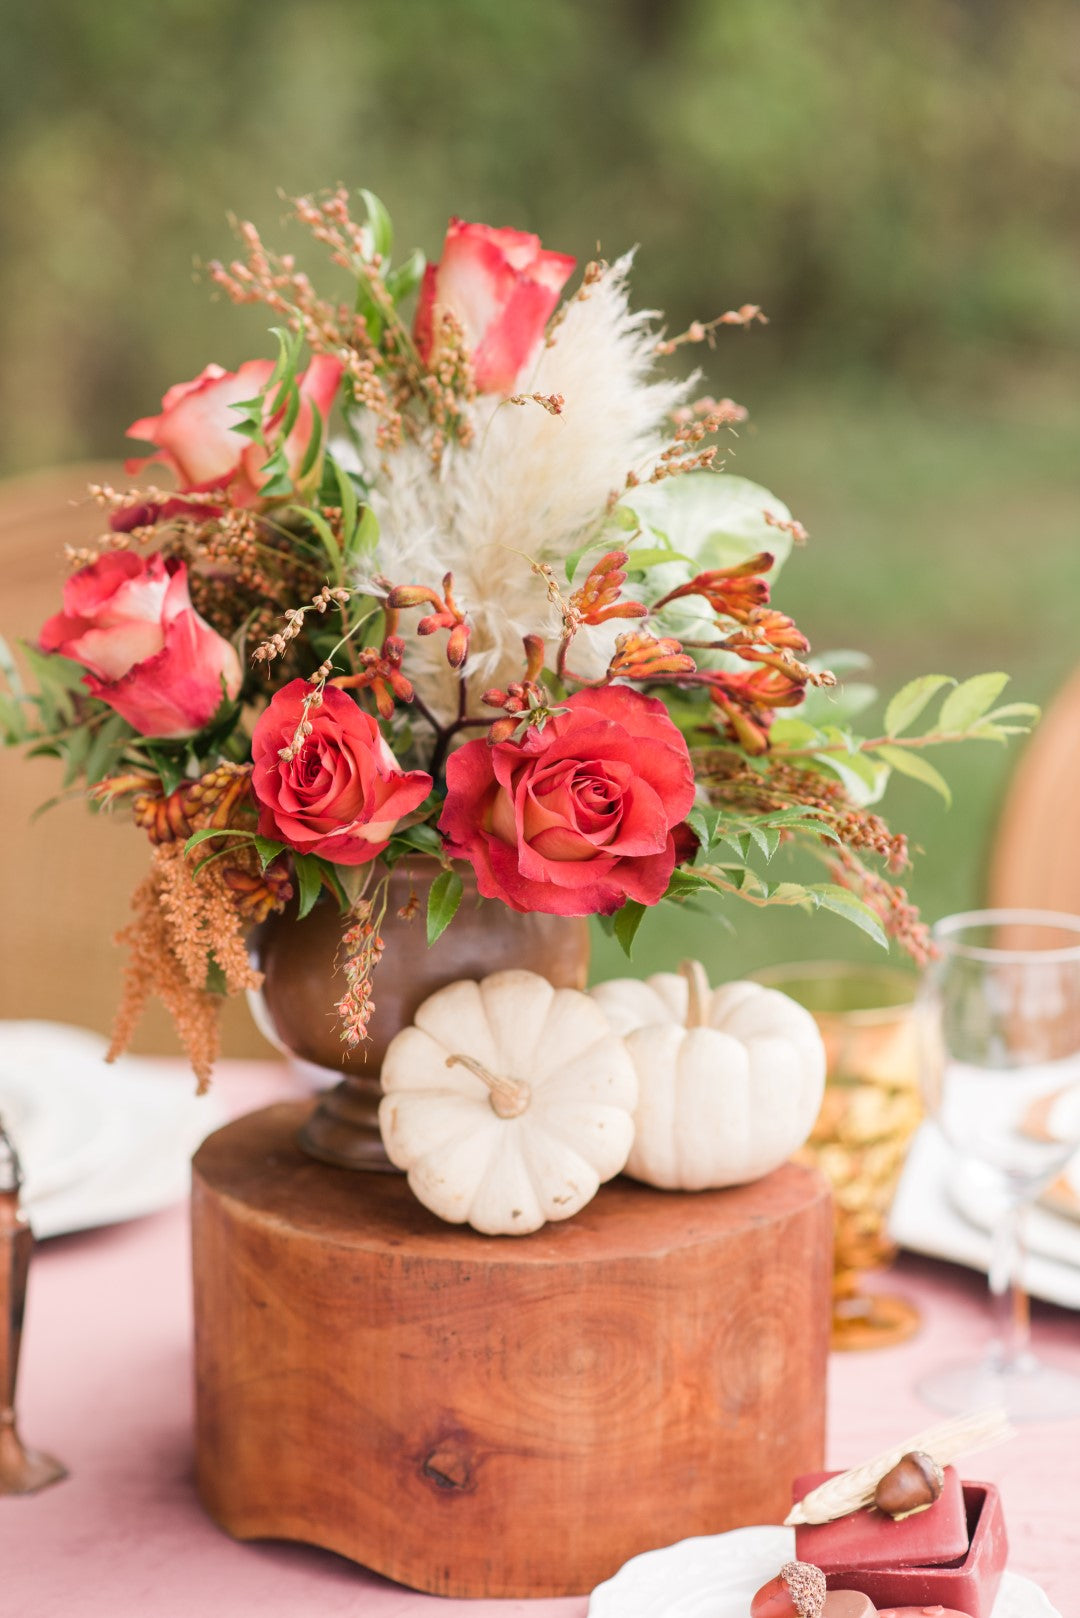 Flowers and pumpkins at a fall wedding